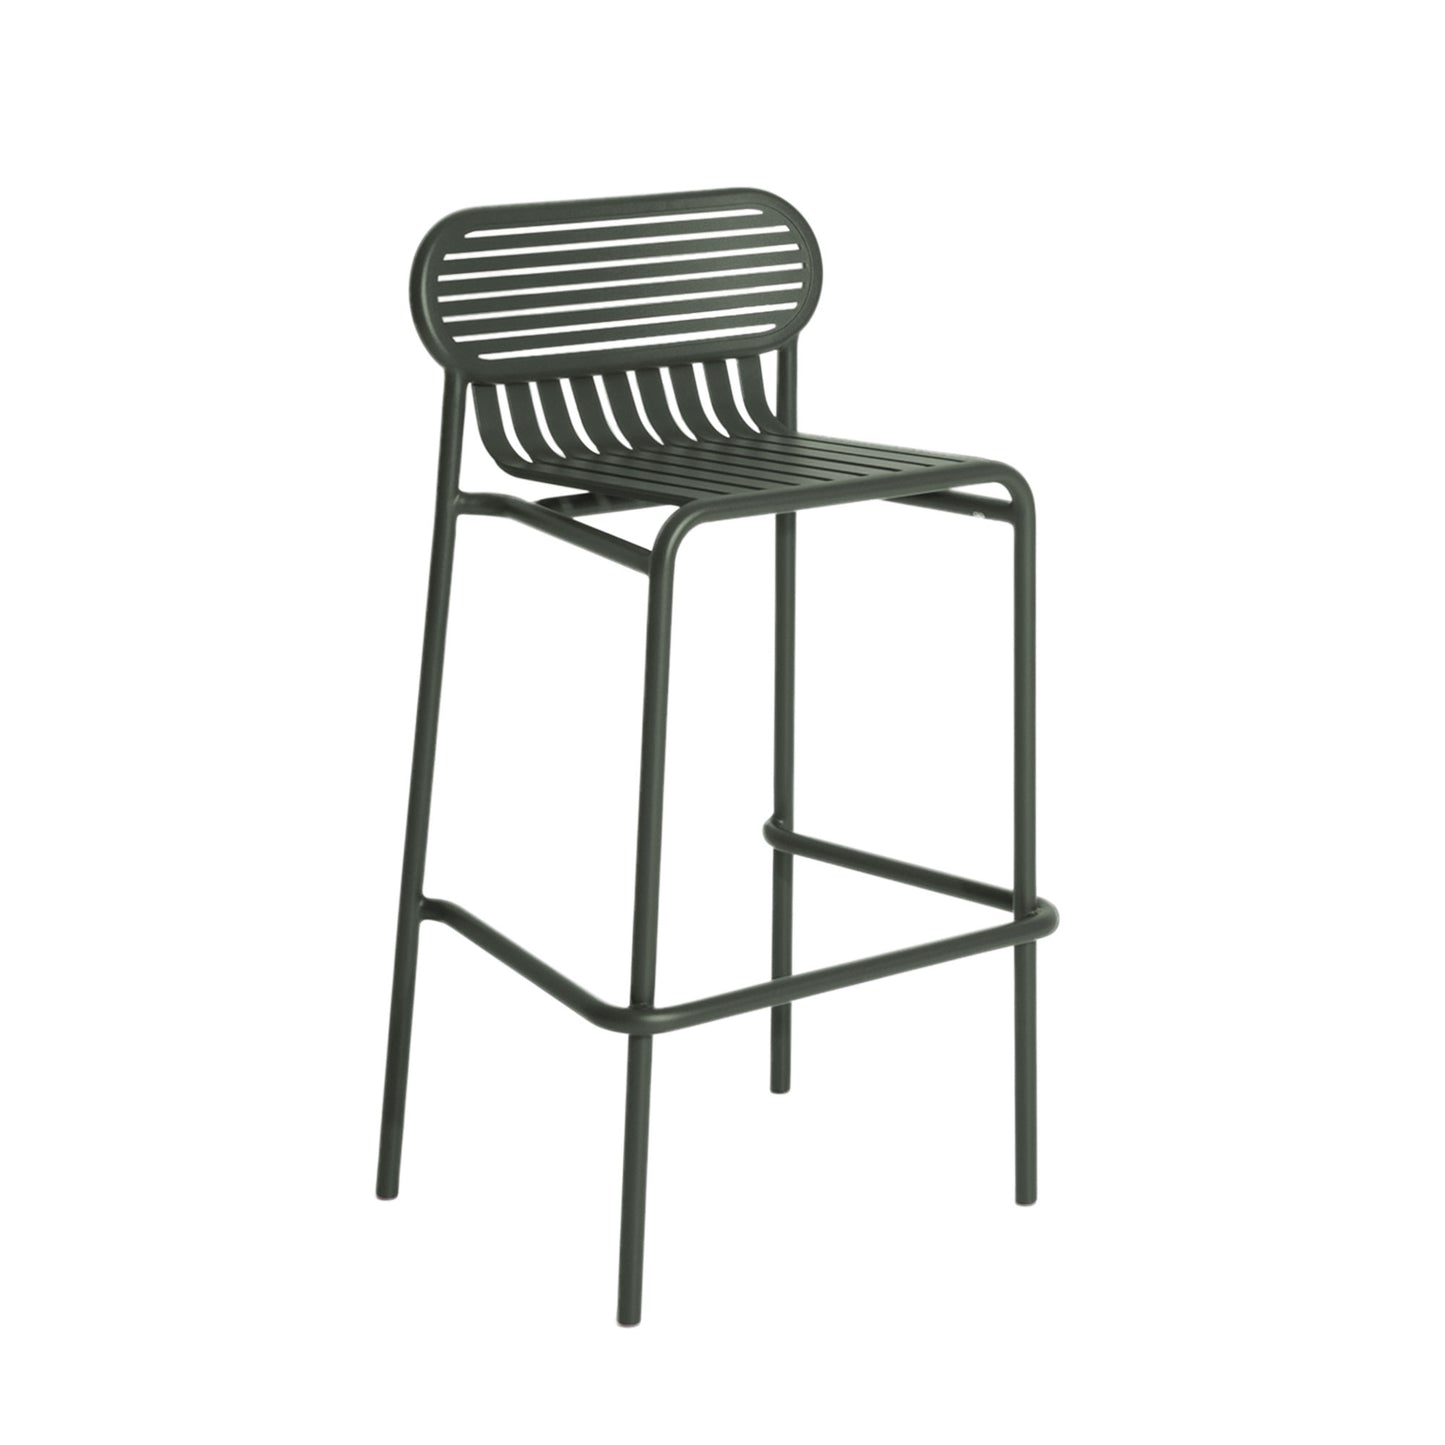 WEEK-END Bar Stool H80 by Petite Friture #Glass Green